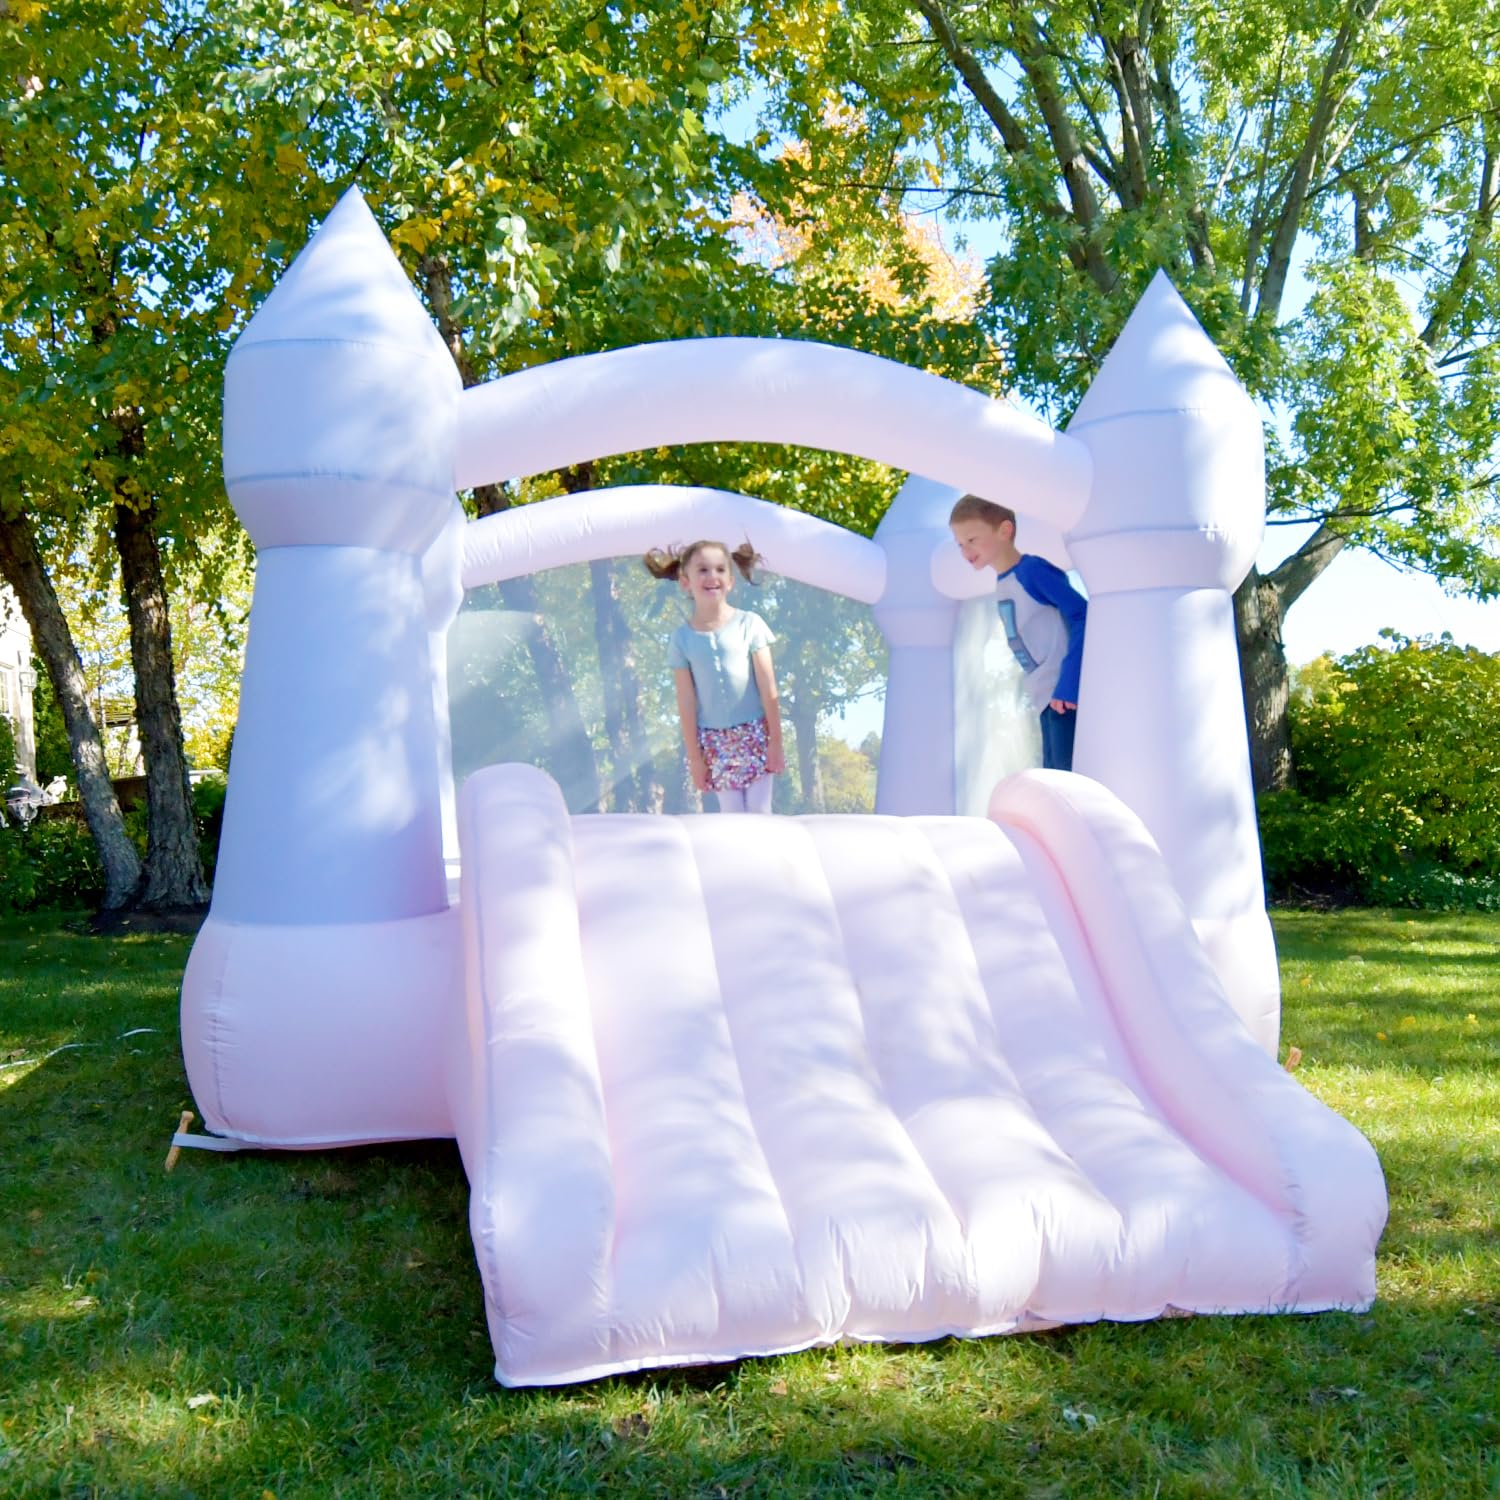 Bounceland Bouncy Castle Daydreamer Cotton Candy Bounce House, Pastel Bouncer with Slide, 12 ft L x 9 ft W x 7 ft H, UL Blower Included, Trendy Bouncer for Kids, Indoor and Outdoor Use